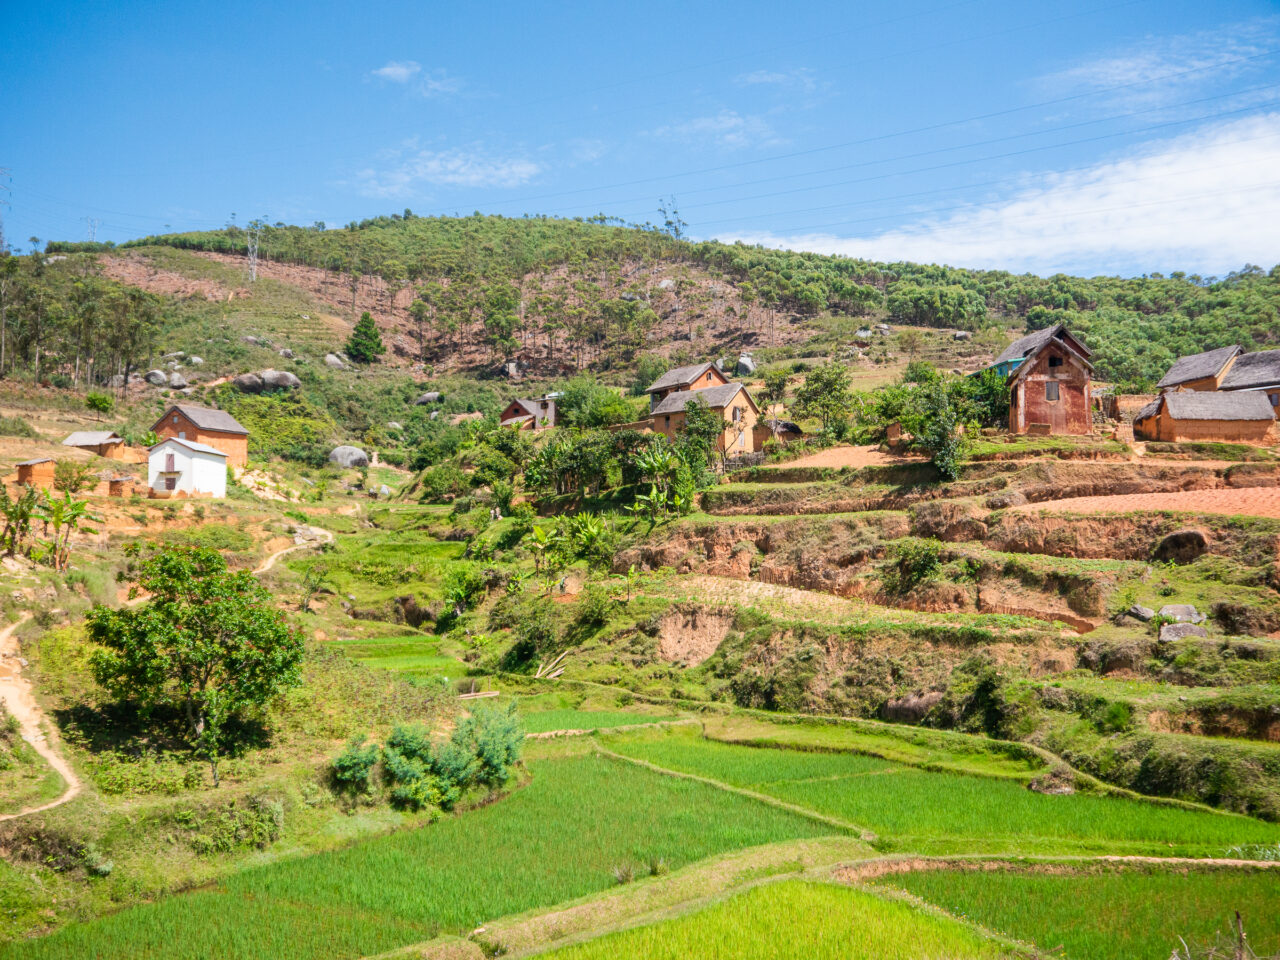 Green landscape and rice fields in Madagascar